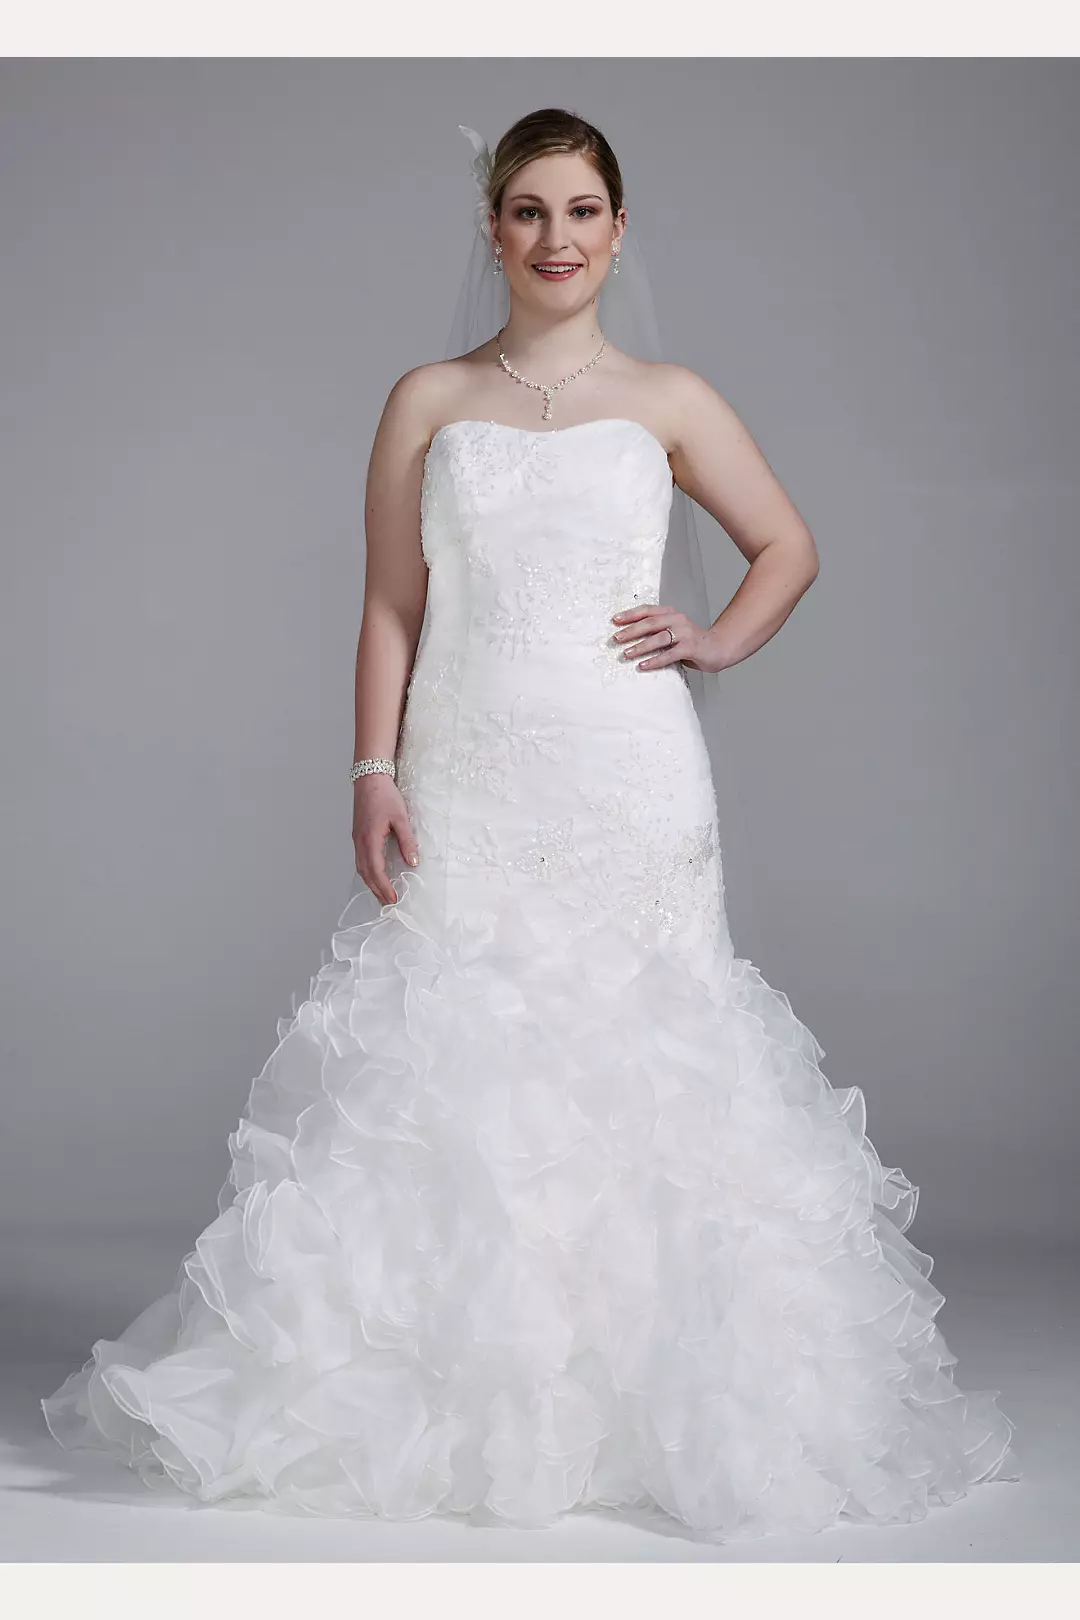 Wedding Gown with Lace Appliques and Ruffled Skirt Image